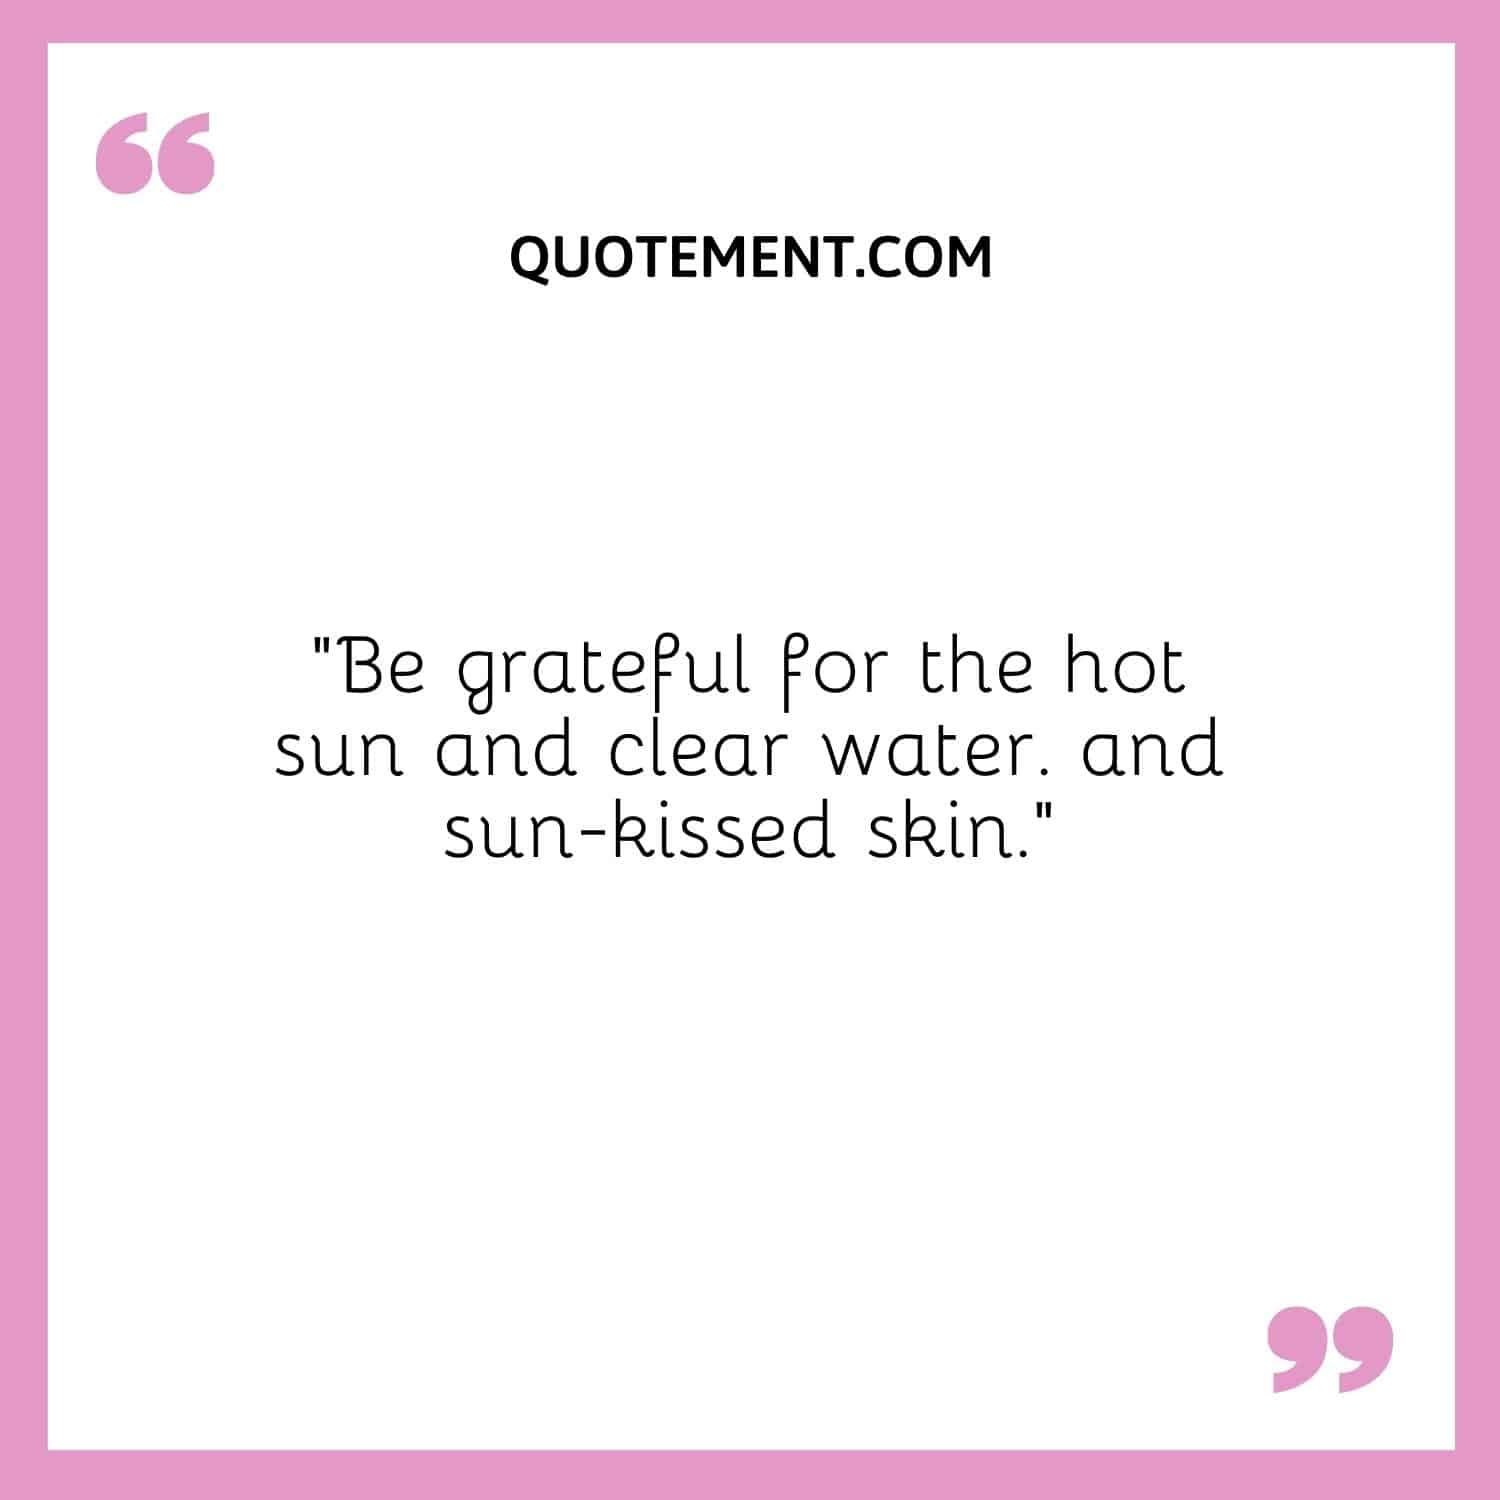 Be grateful for the hot sun and clear water